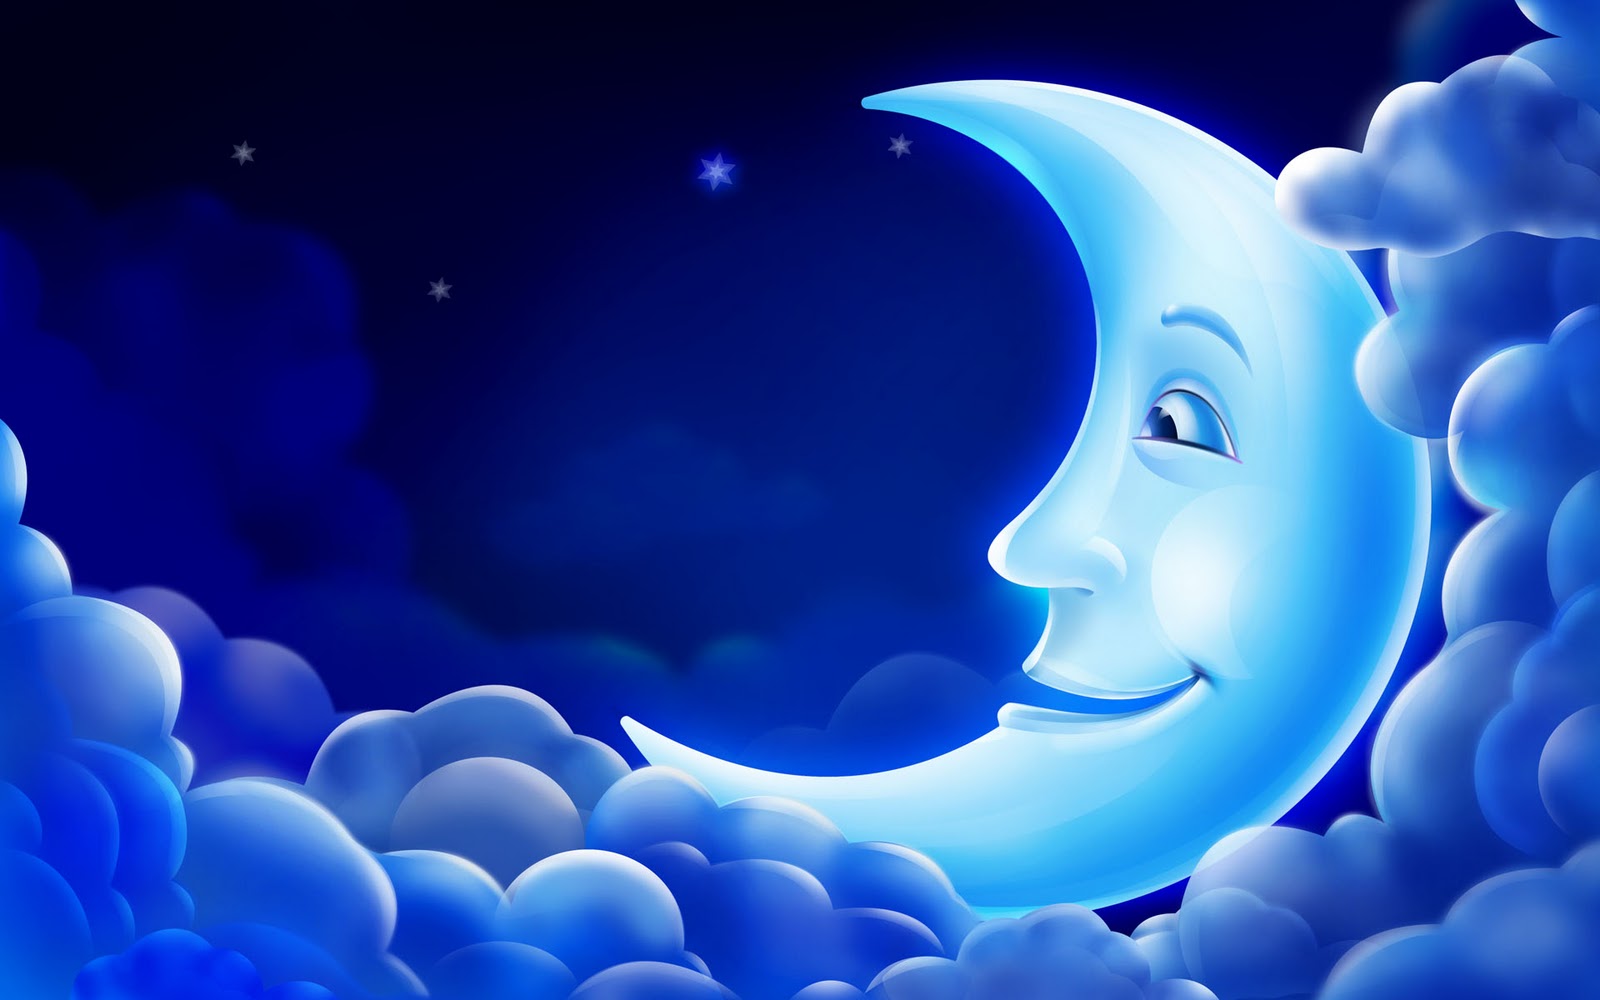 3d Blue Animated Moon Ppt Background For Your Powerpoint